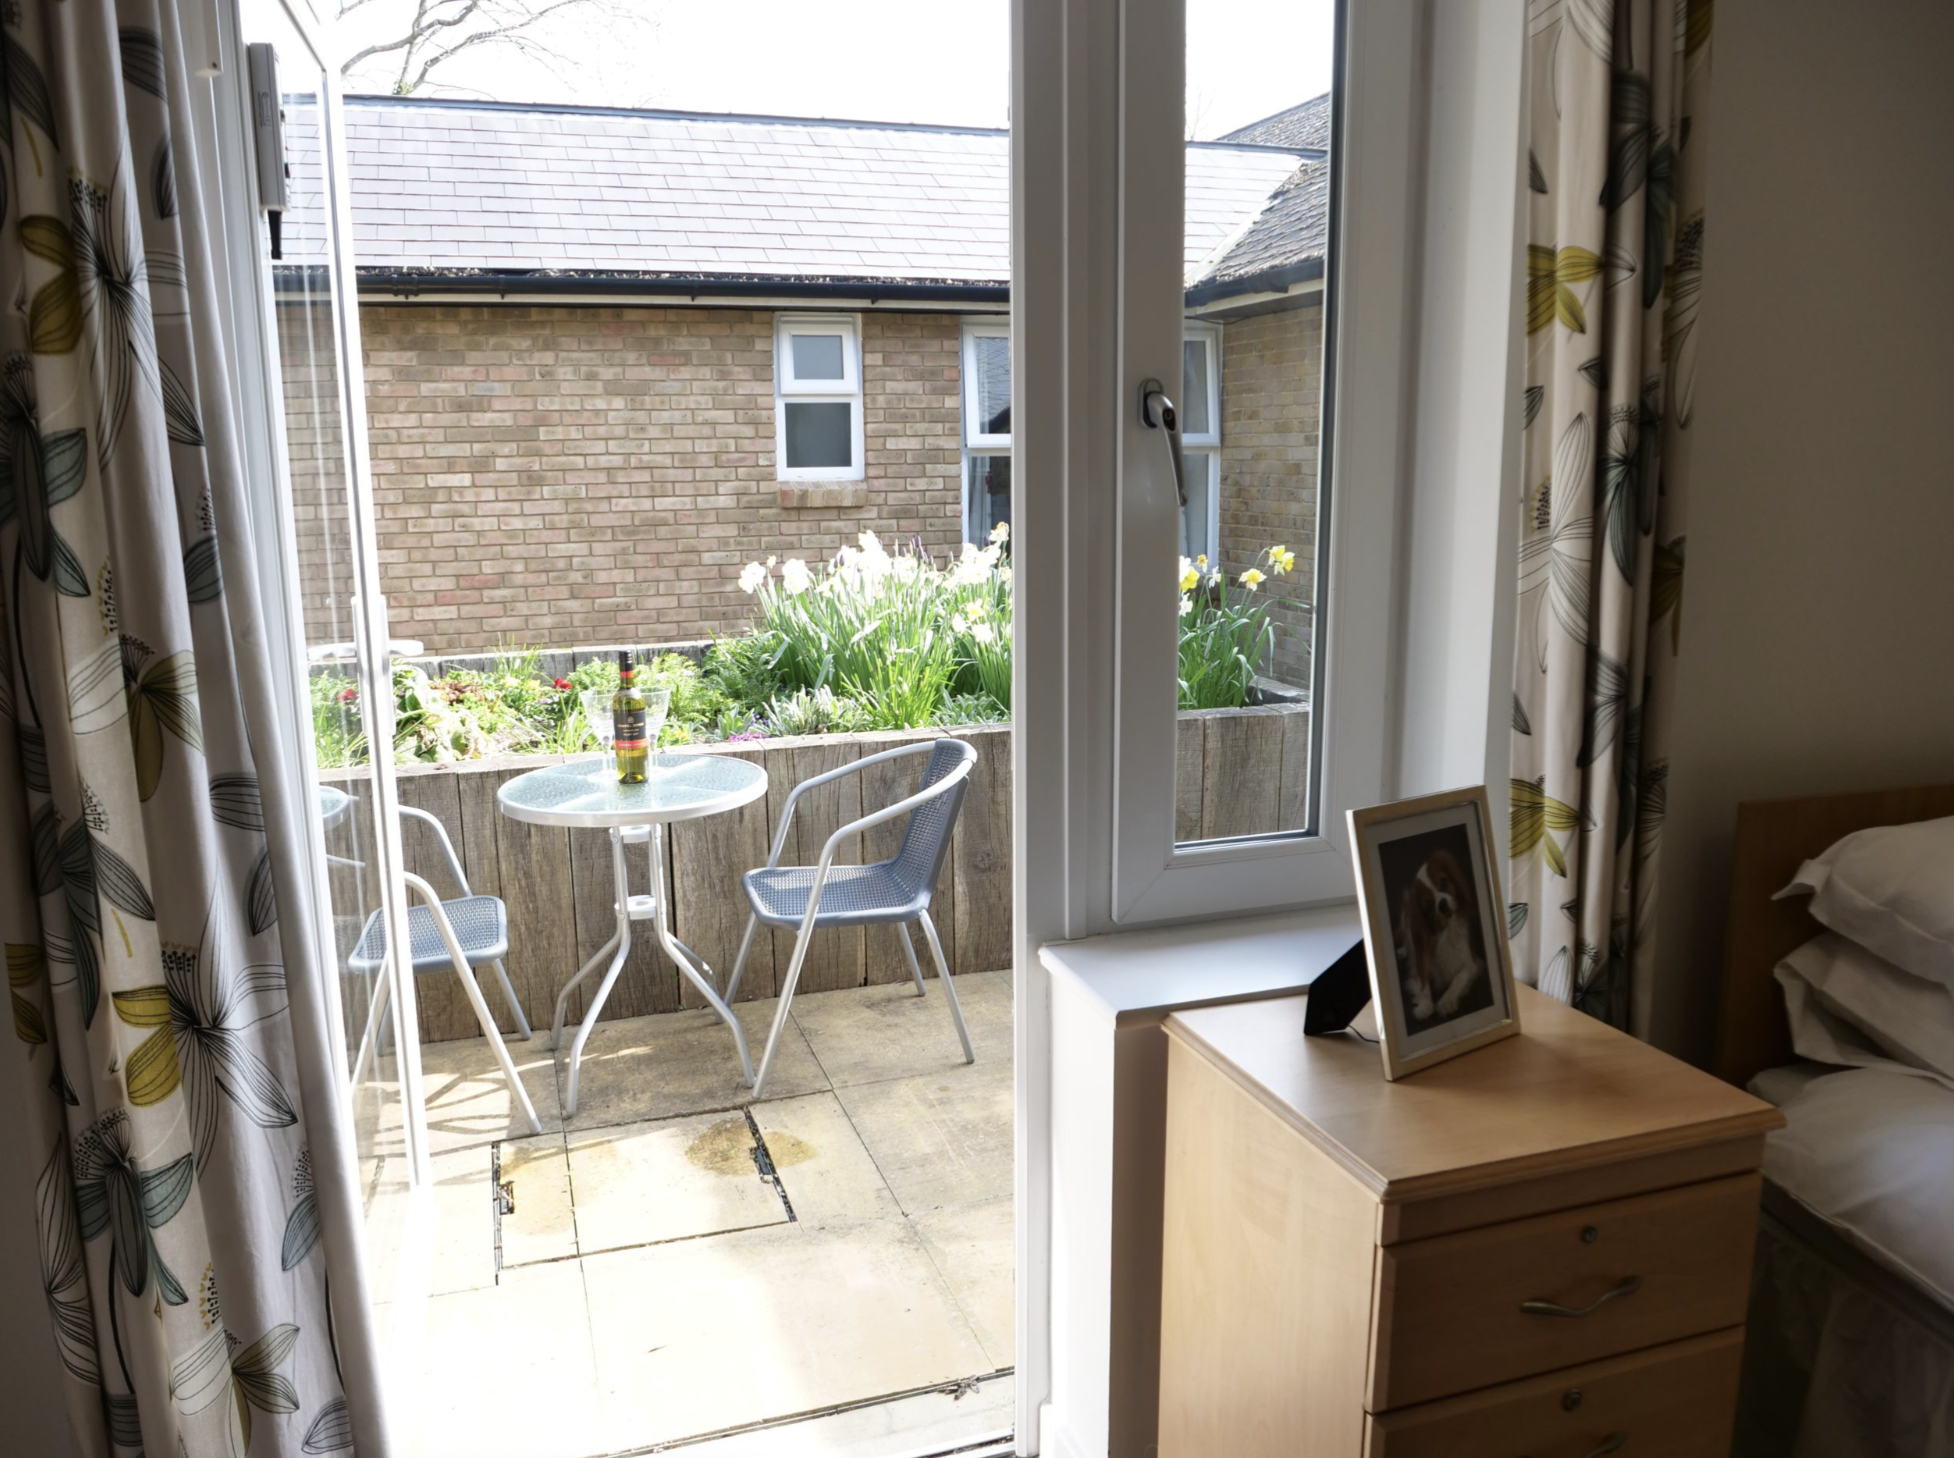 Bedroom patio of Hartley House care home in Cranbrook, Kent,